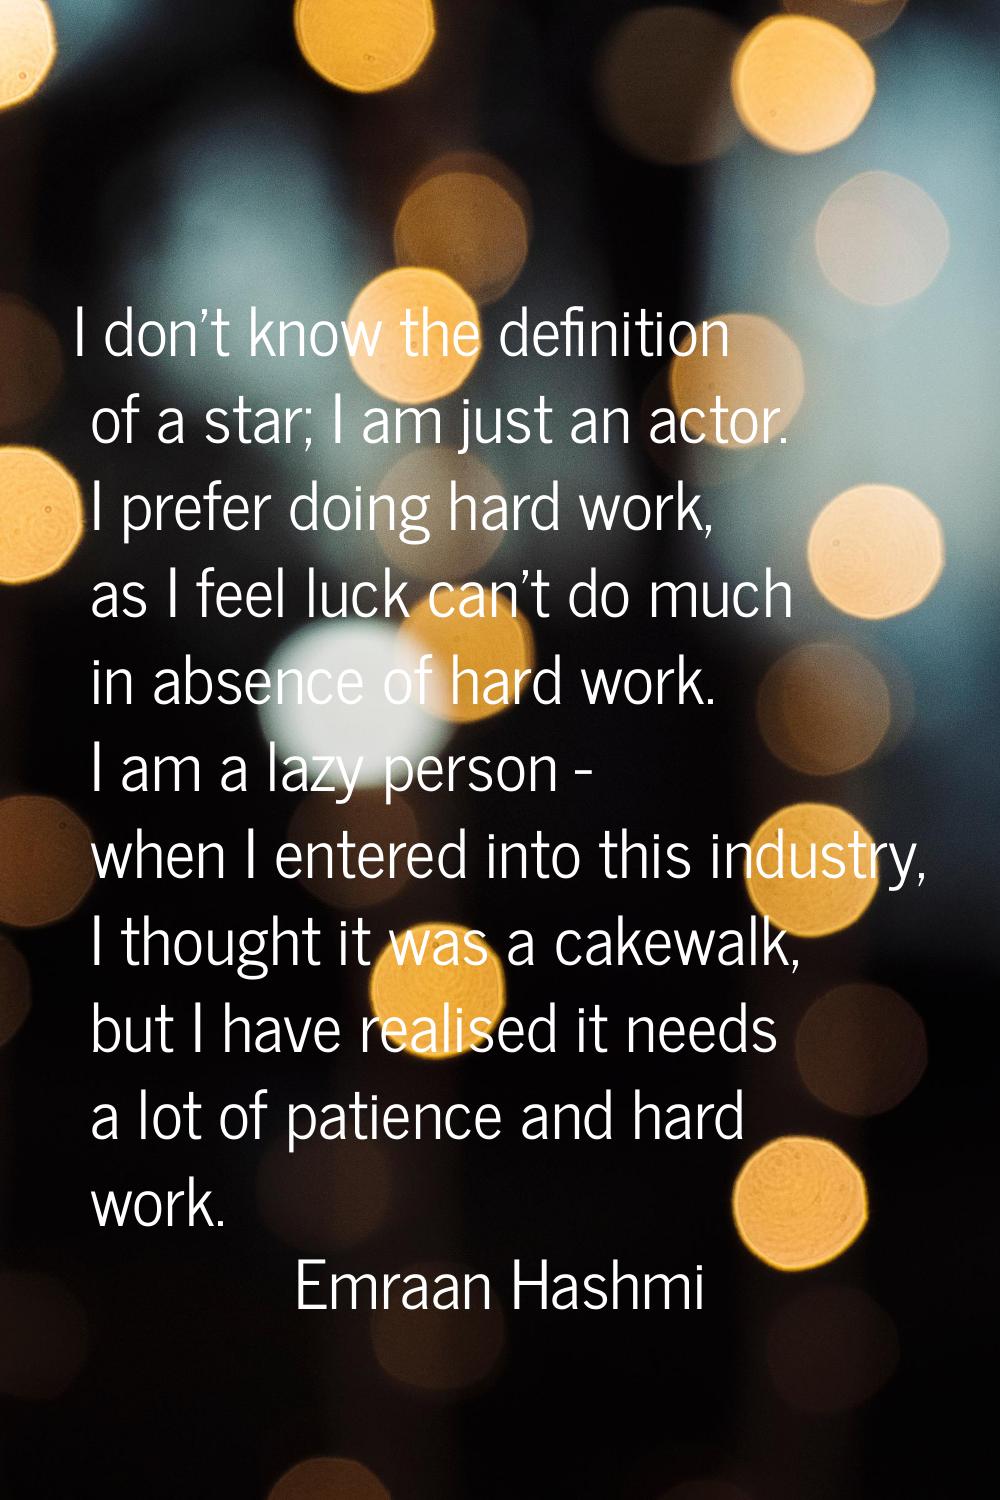 I don't know the definition of a star; I am just an actor. I prefer doing hard work, as I feel luck